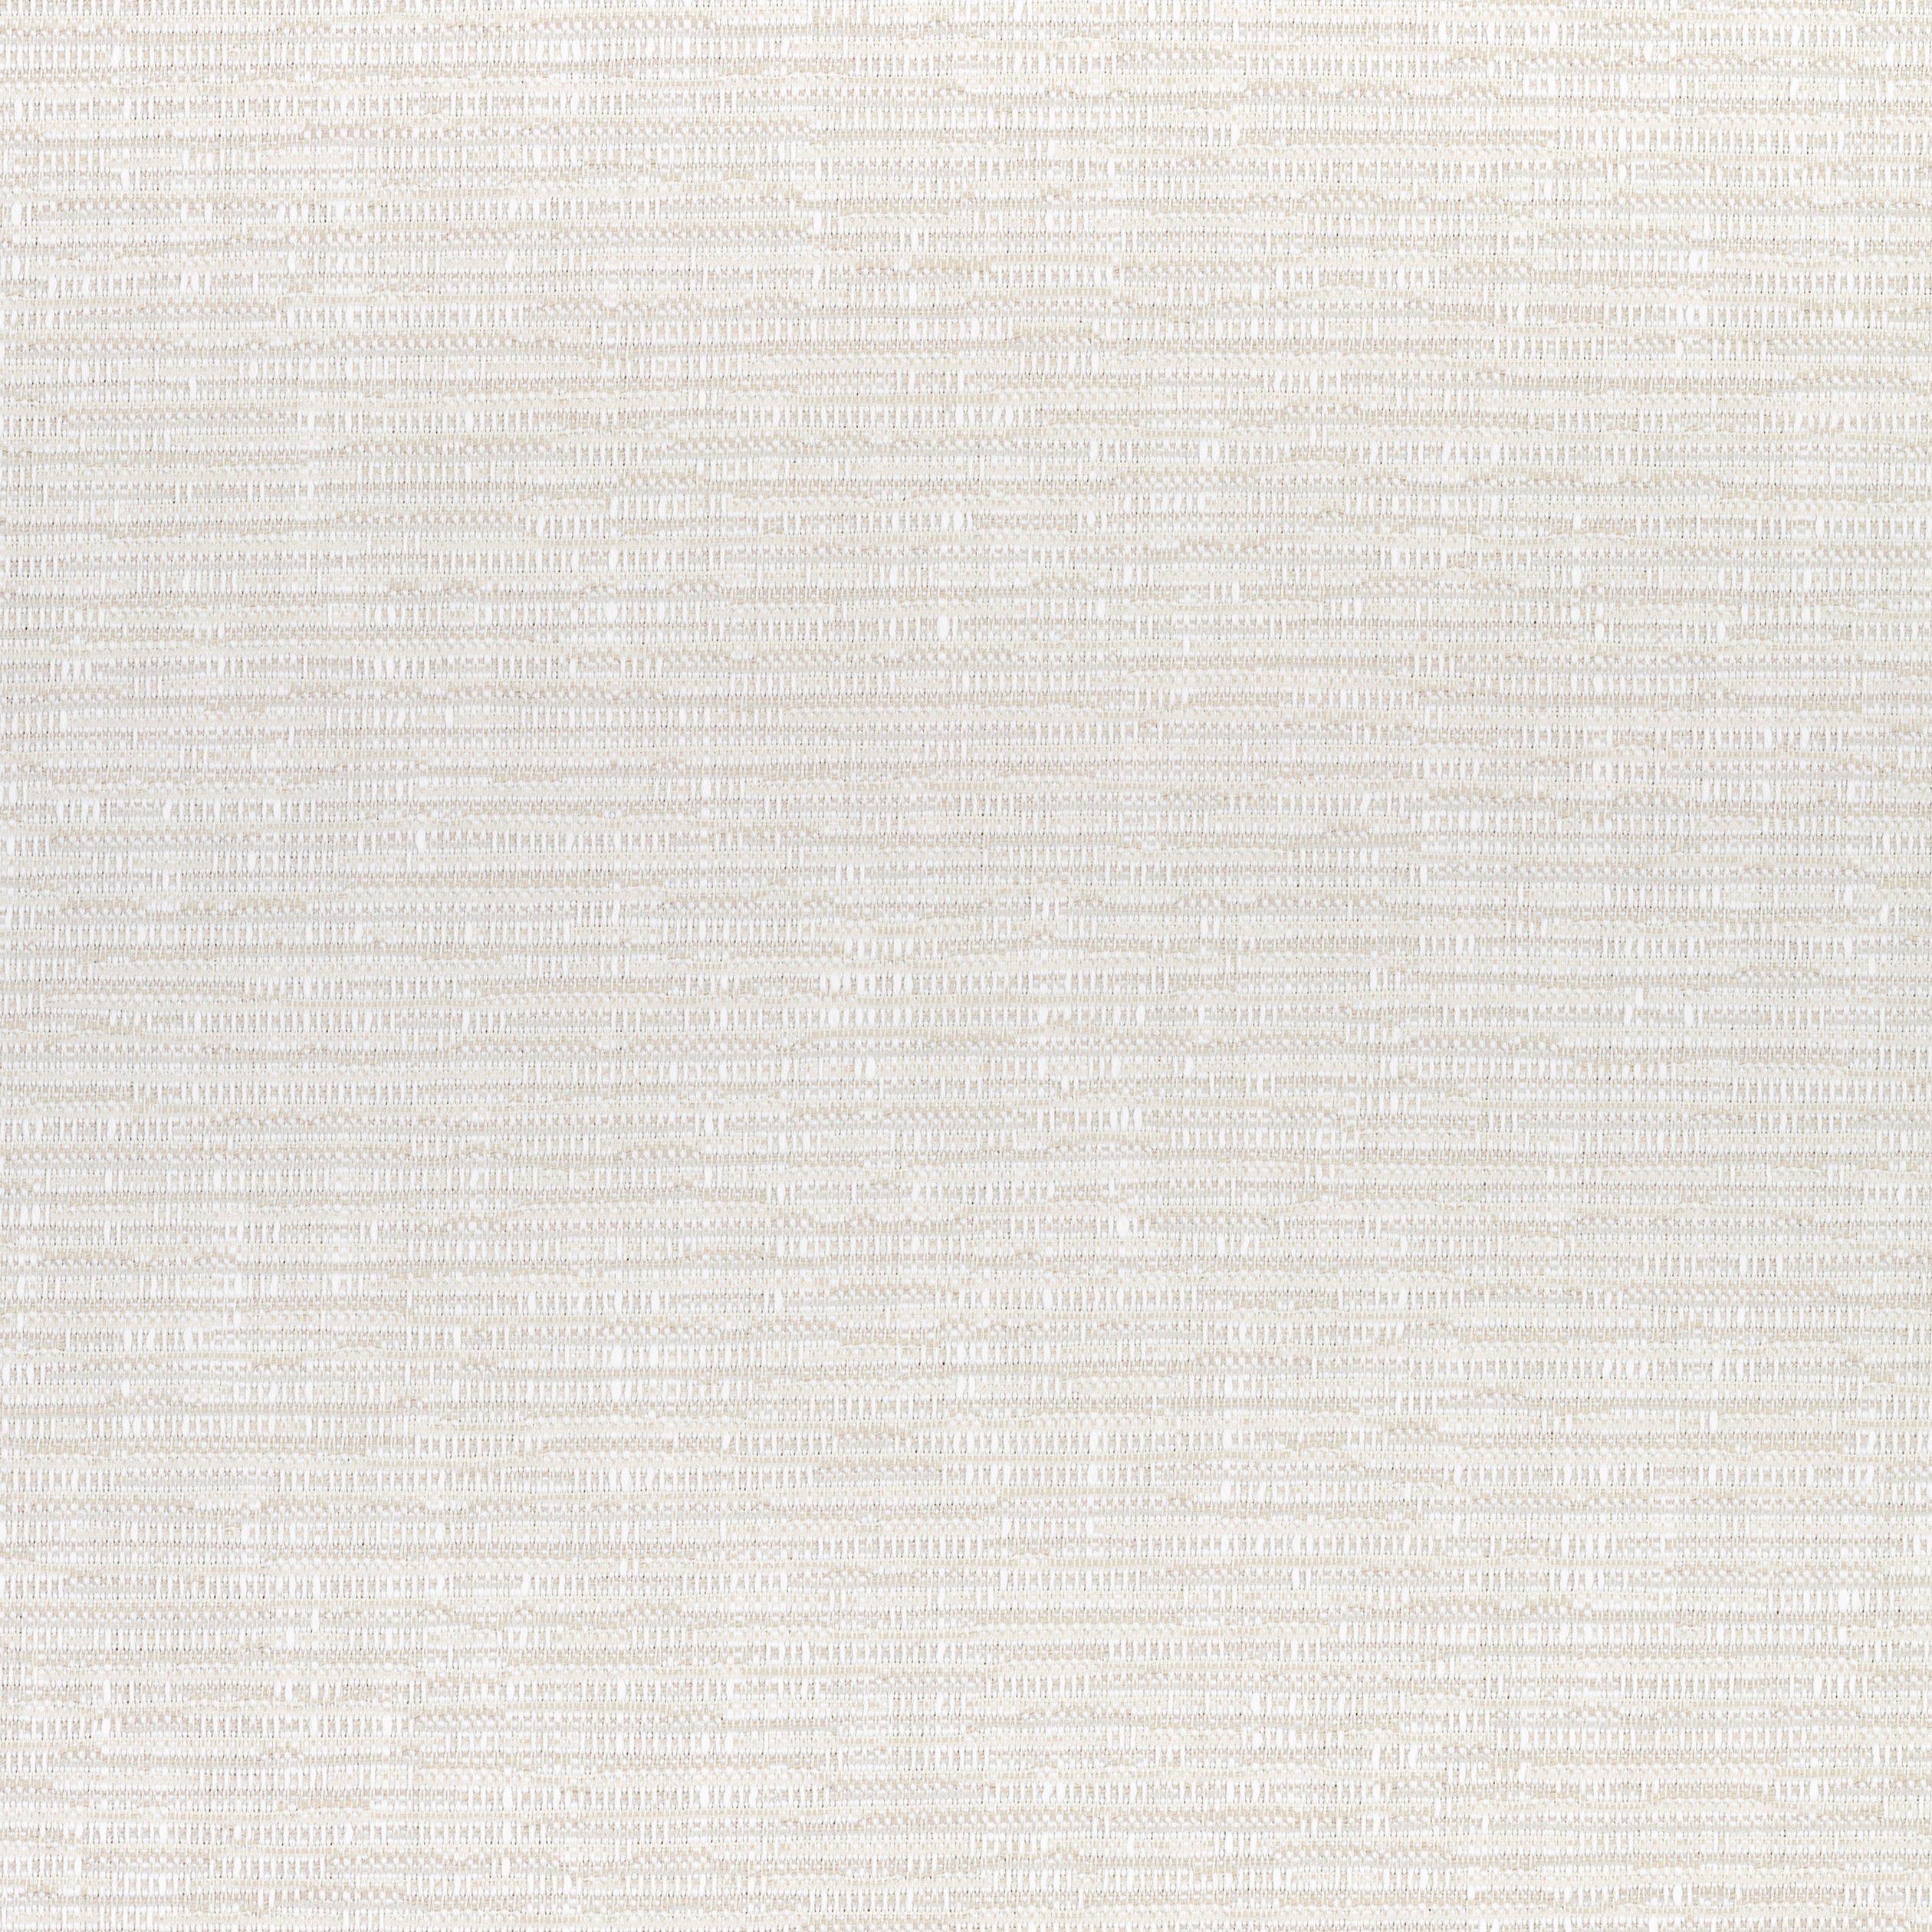 Cadence fabric in flax color - pattern number W74035 - by Thibaut in the Cadence collection